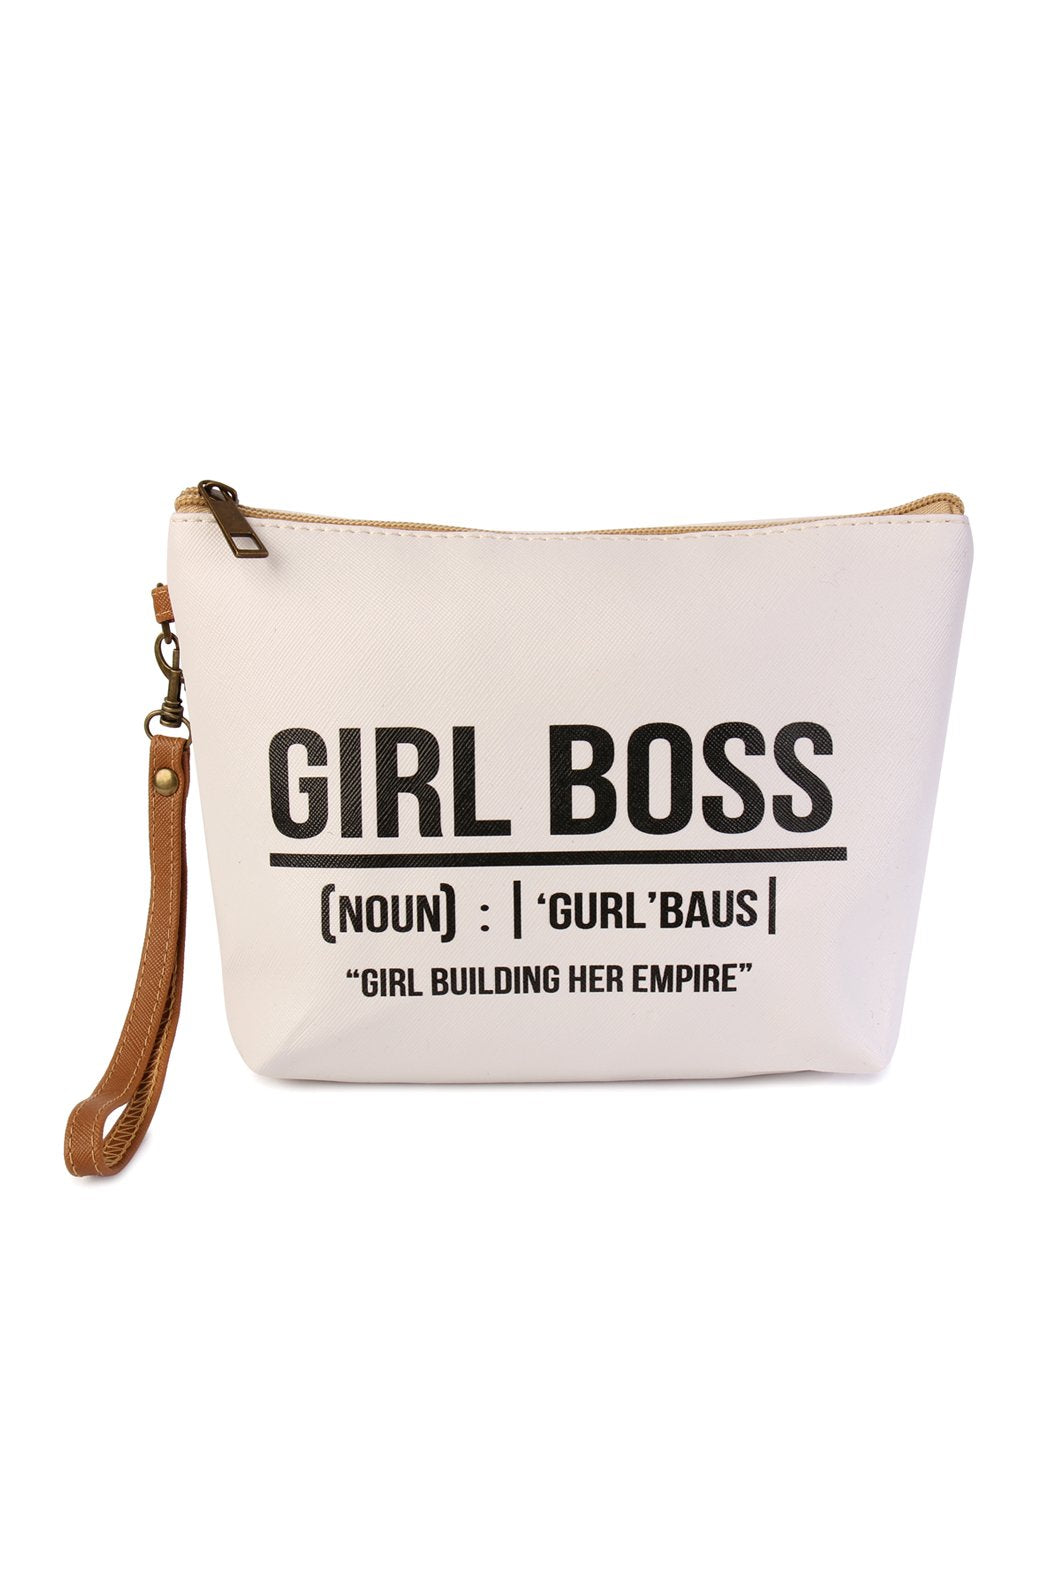 Girl Boss Cosmetic Bag - Lily And Ann Online Boutique